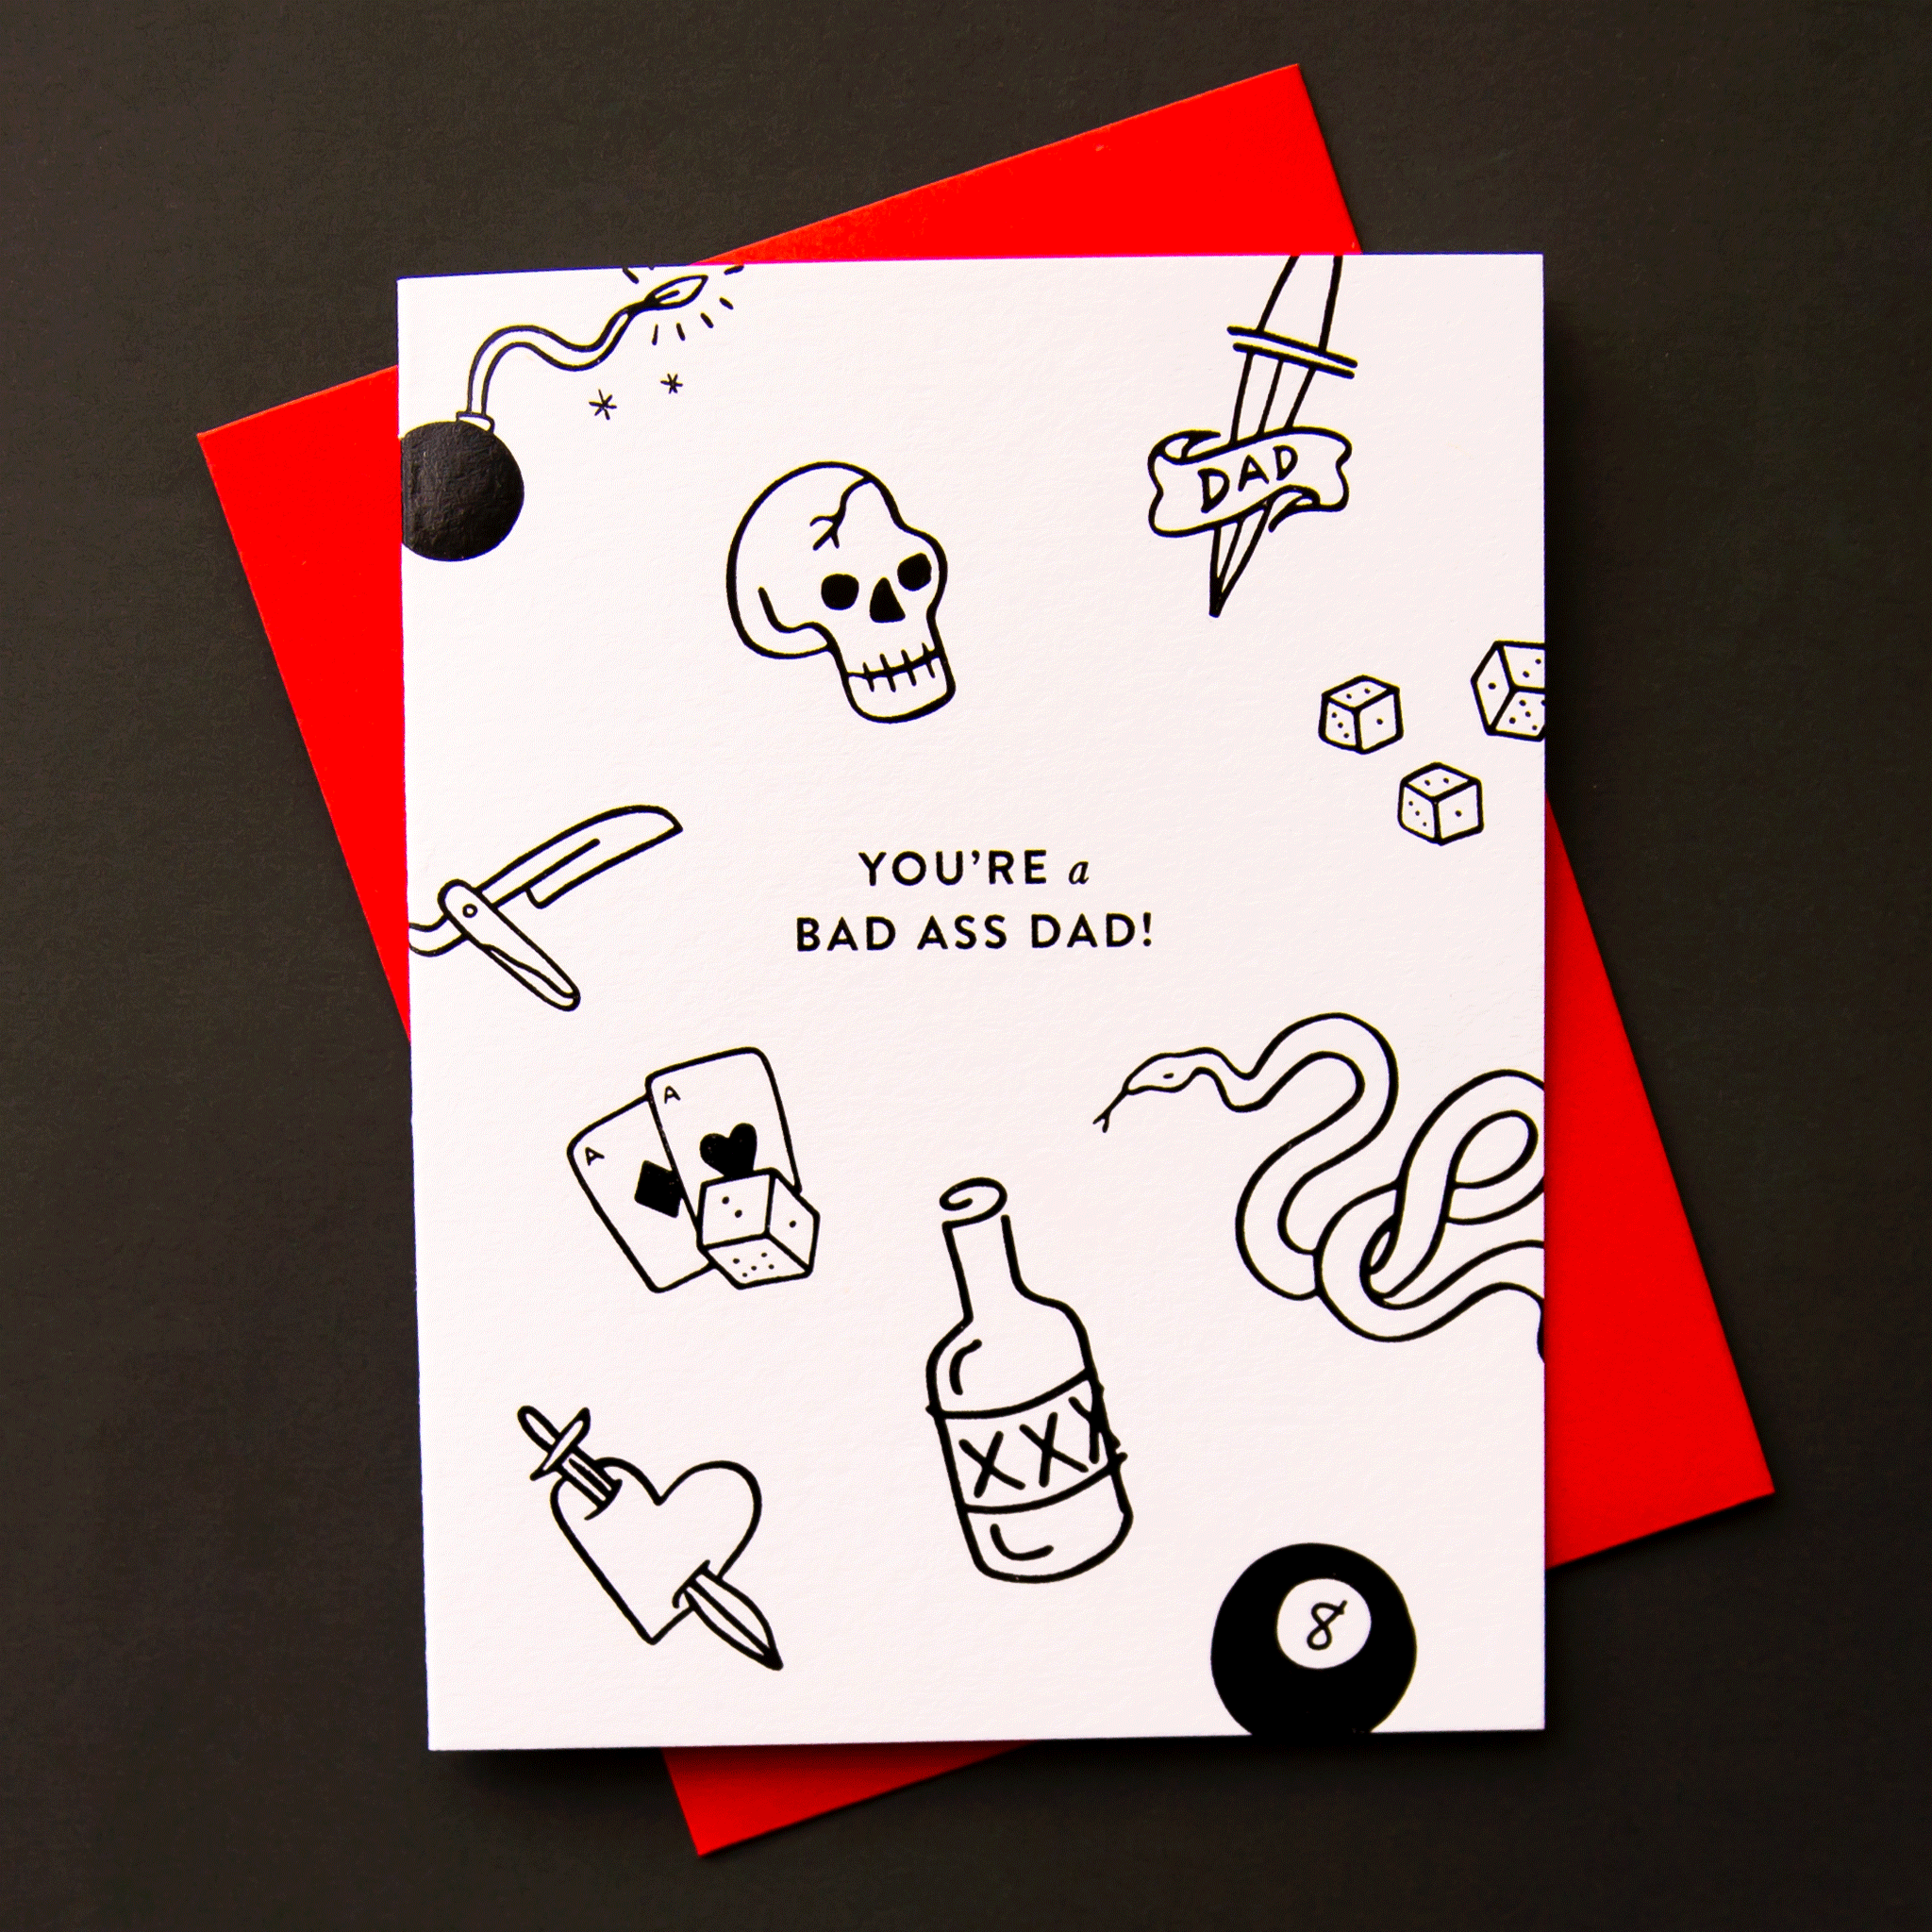 On a black background is a white card with black tattoo-like sketches of skulls, cards, a snake, eight ball and more along with text in the center that reads, "You're a Bad Ass Dad!". 